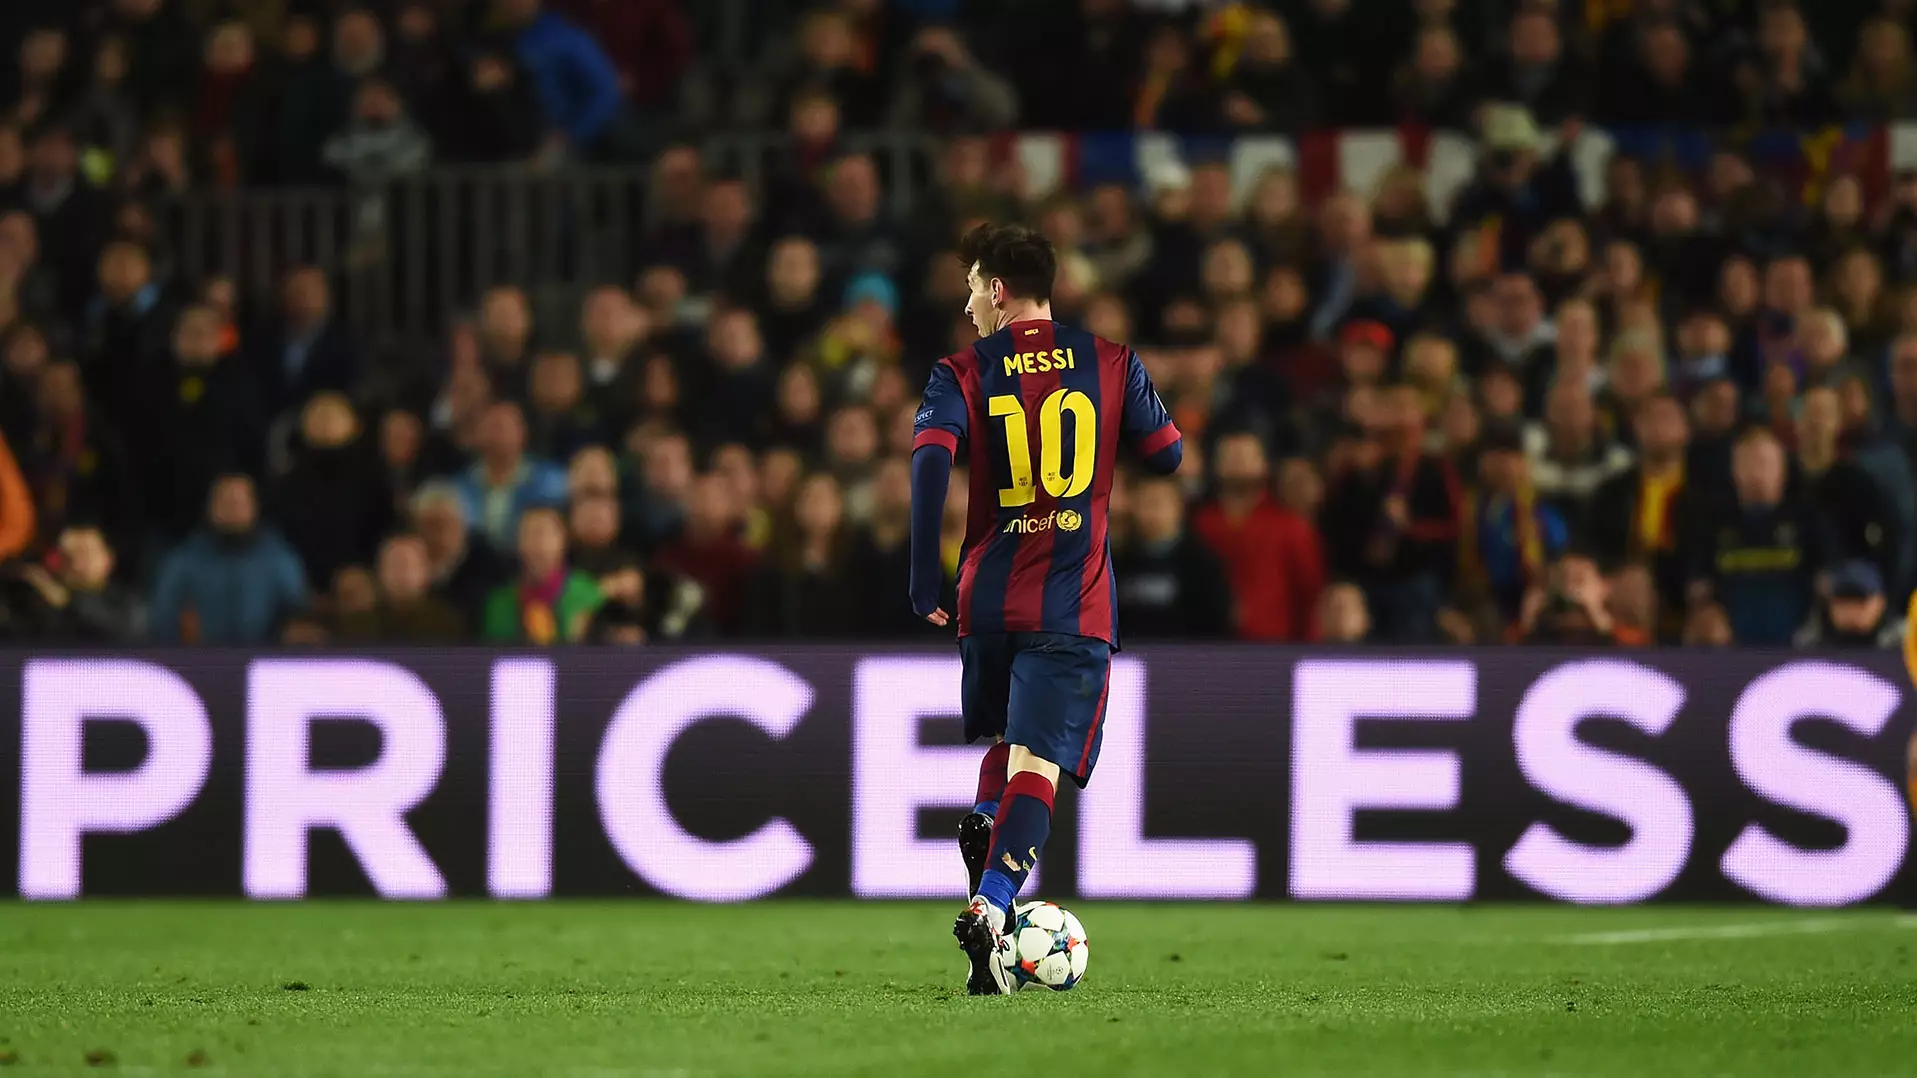 Messi Has Scored The Most Goals For One Club In The Top Five European Leagues